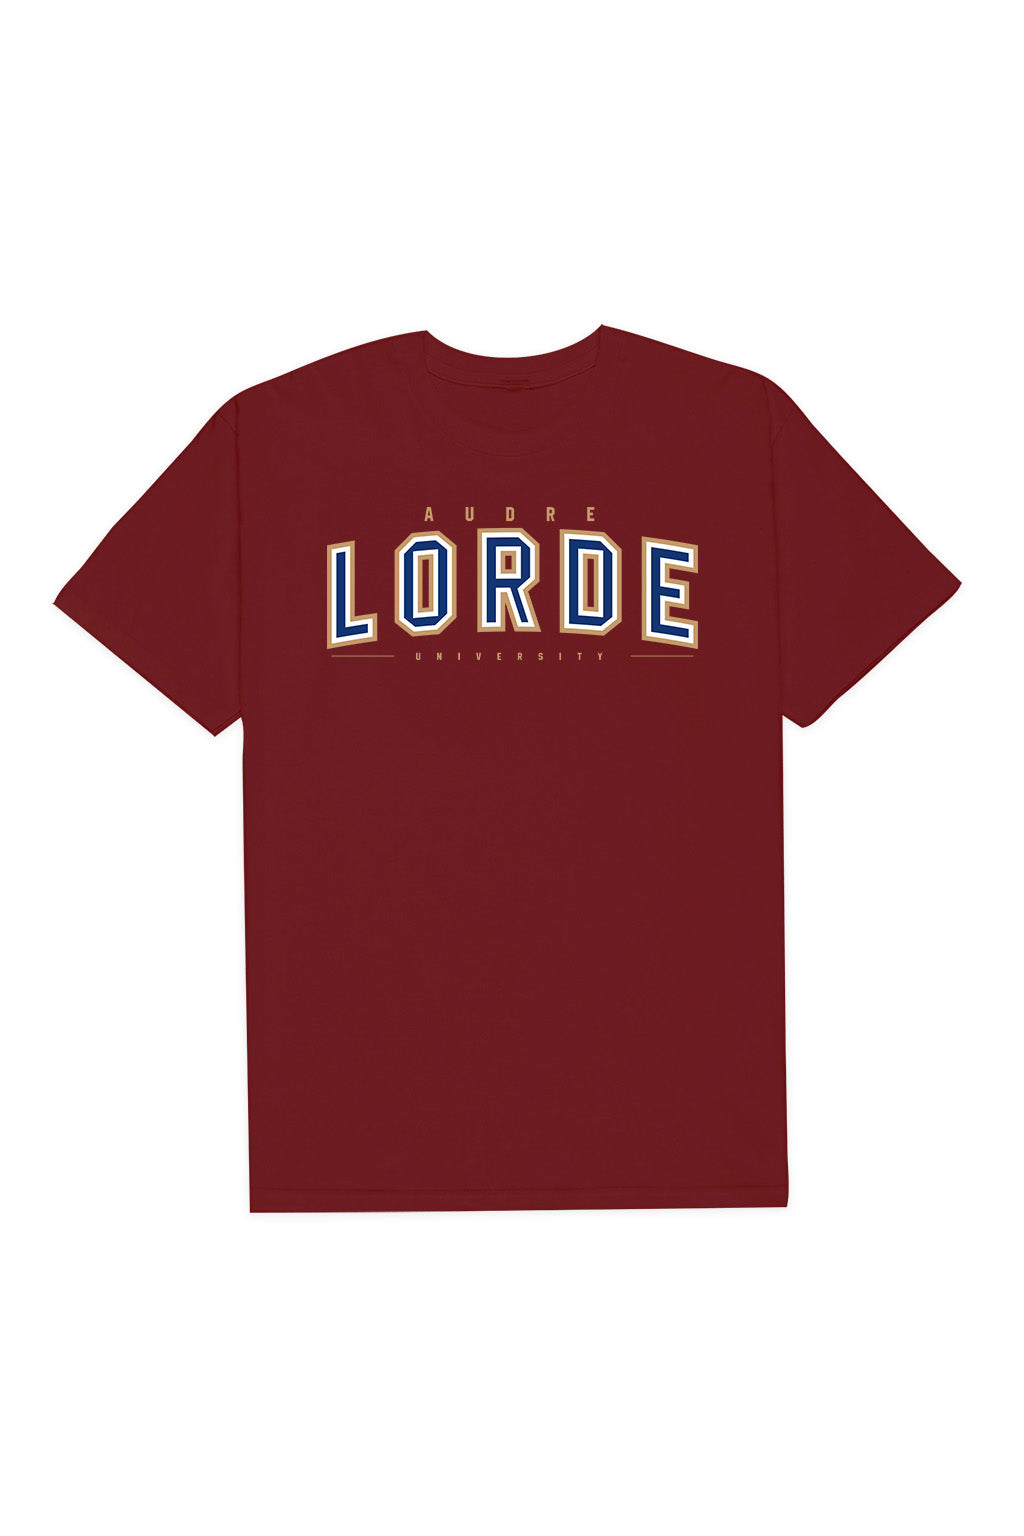 School of Thought | Audre Lorde Collegiate T-Shirt